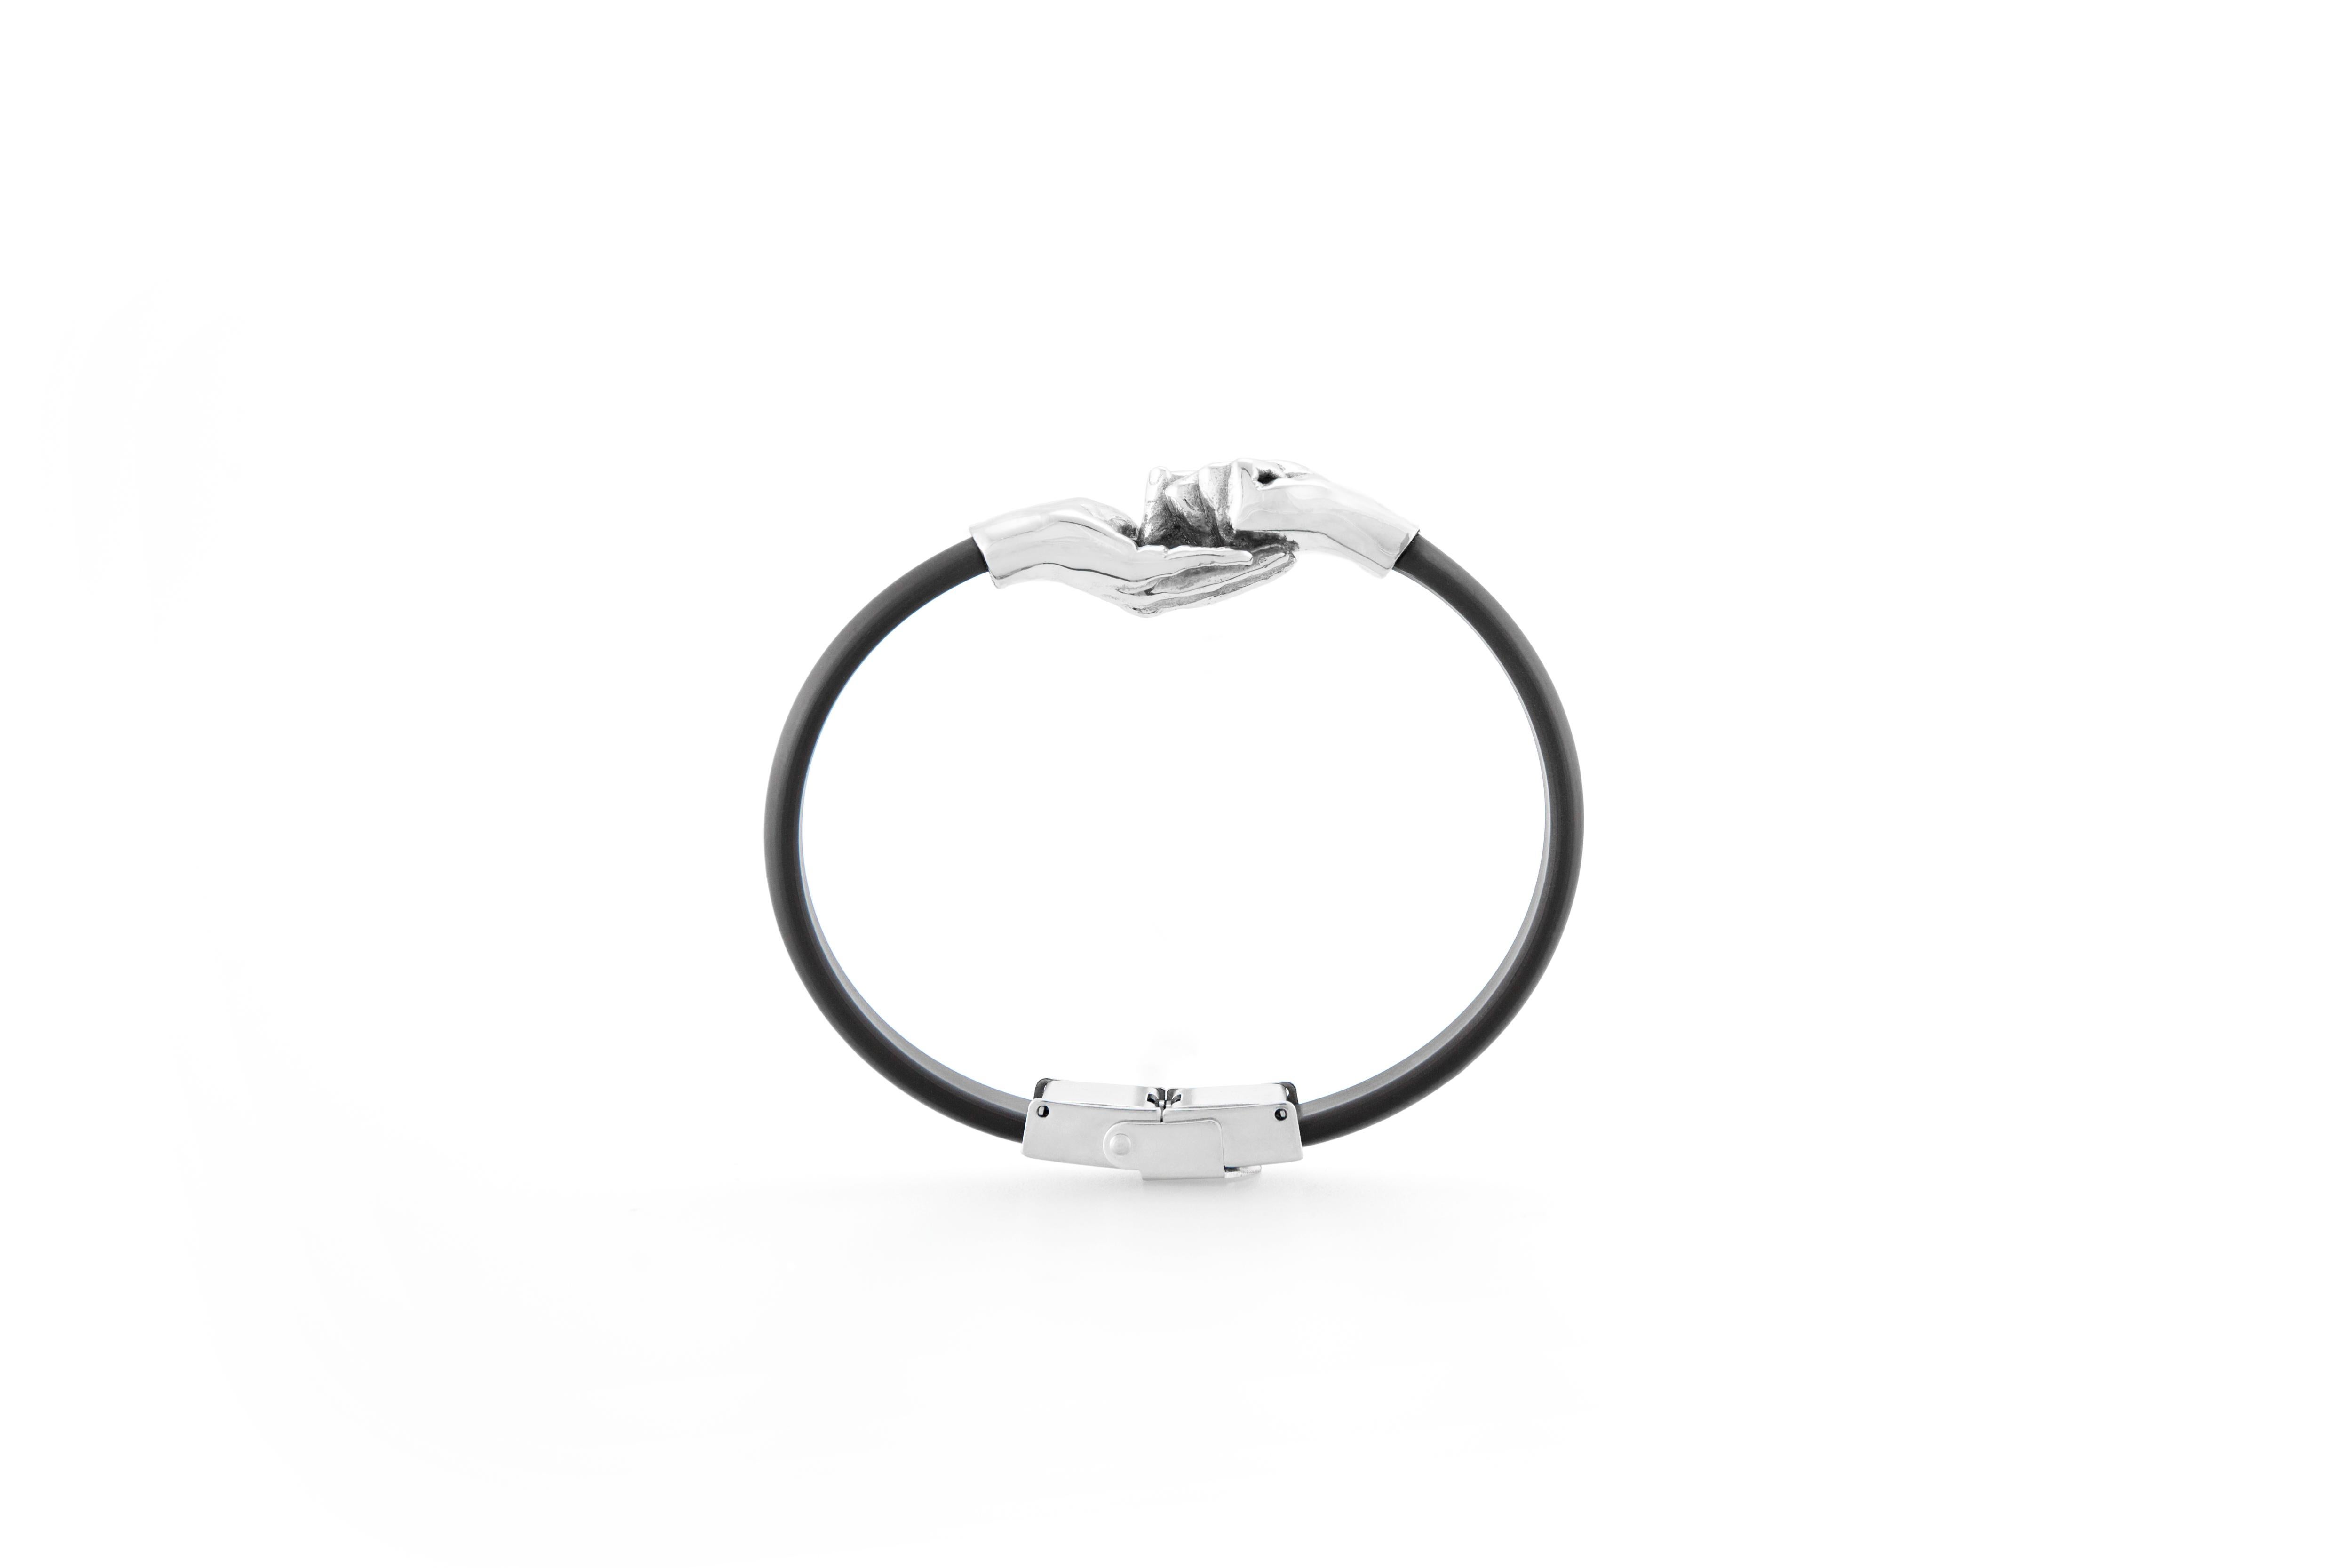 Silver and Rubber bracelet from the Give & Receive collection by Lorenzo Quinn.
Available in 16 vibrant colours, please request your personal favourite.
Also available in double twist bracelet, see another listing.

Inspiration
